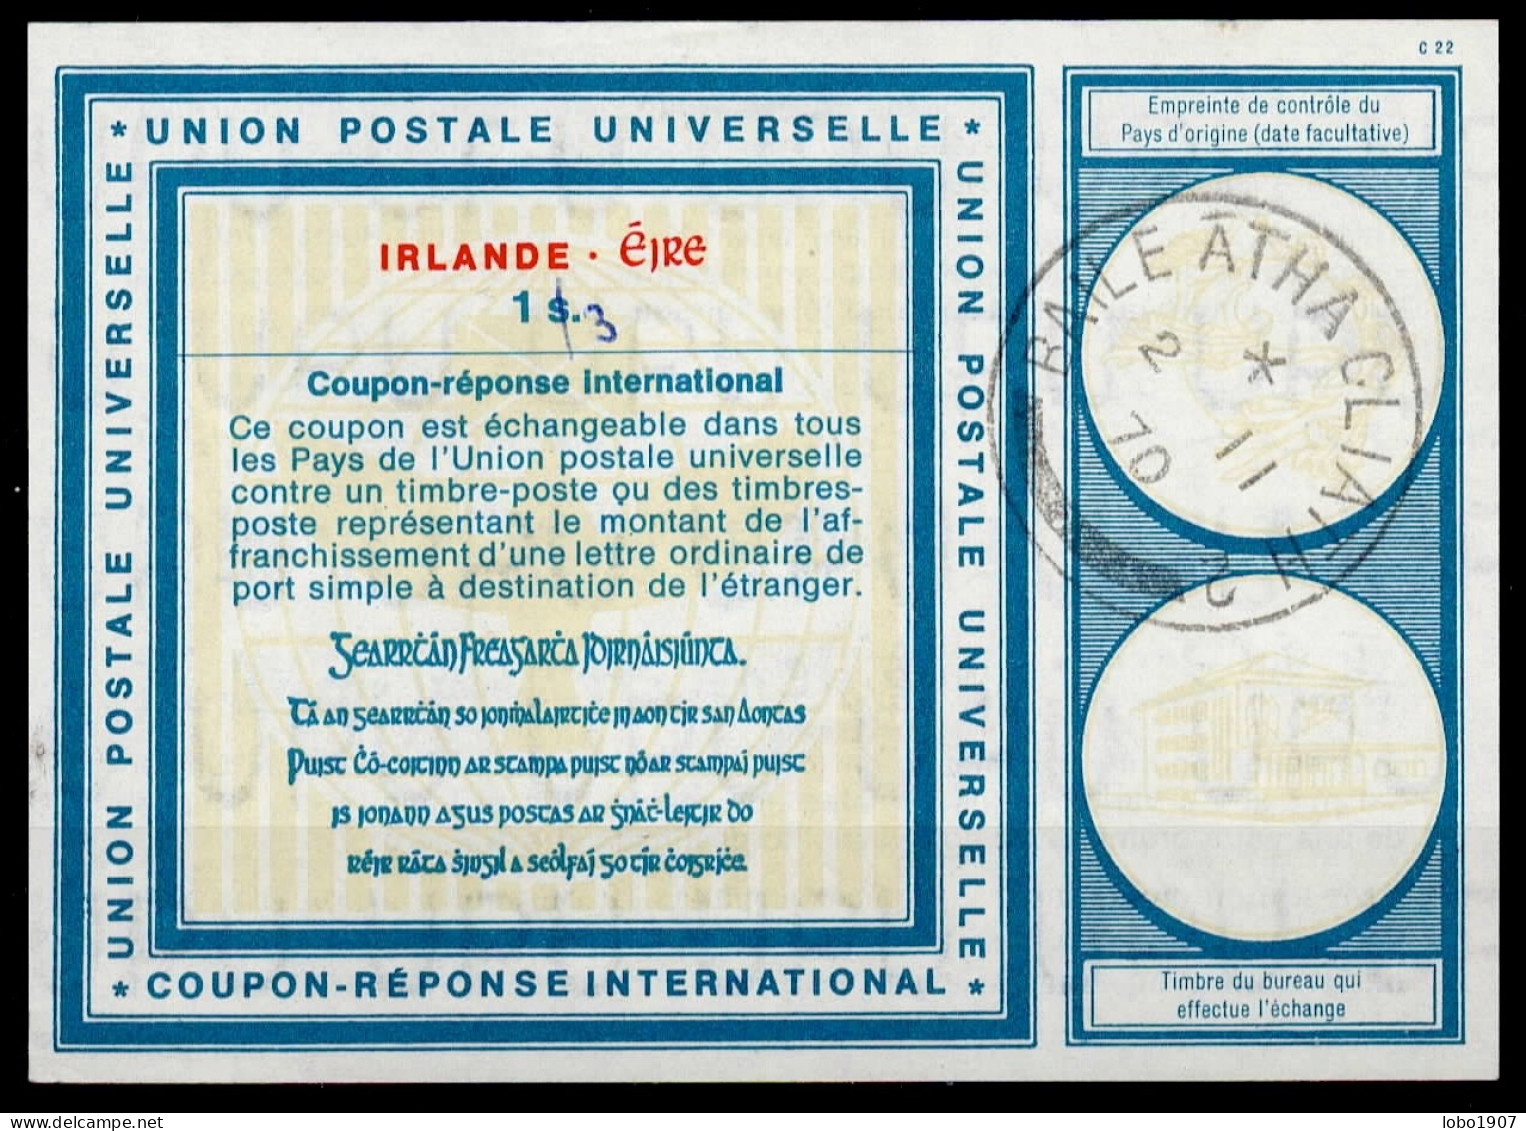 IRLANDE IRELAND ÉIRE  Vi19  (1s.) 3(d.) On 1s. International Reply Coupon Reponse Antwortschein IRC IAS O B.A.C. 02.11.7 - Postal Stationery